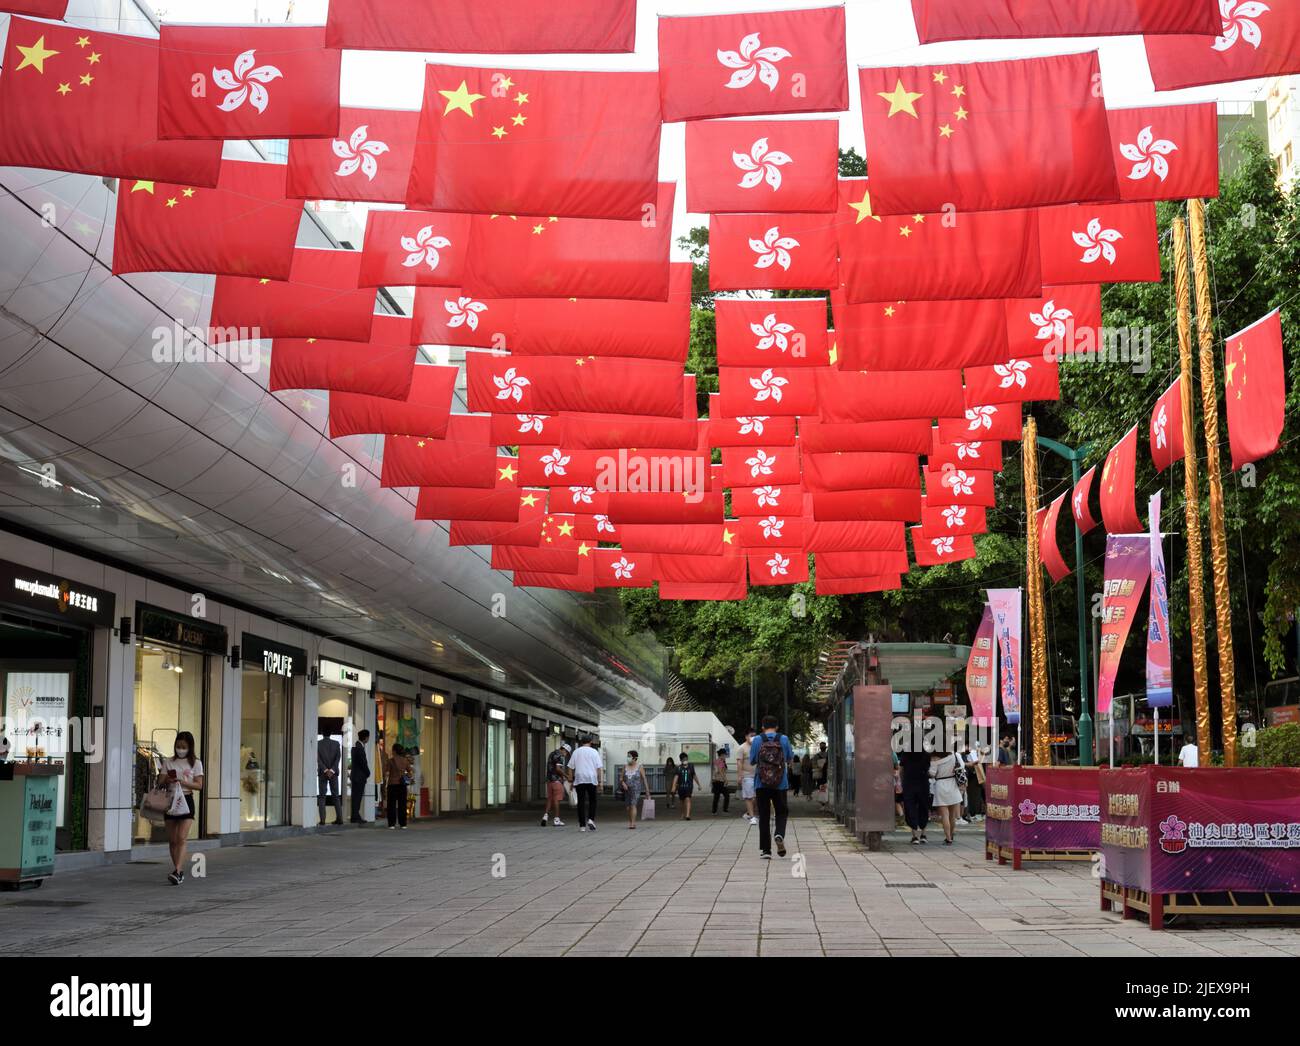 Decoration on street to celebration of the 25th anniversary of the establishment of Hong Kong SAR China Stock Photo